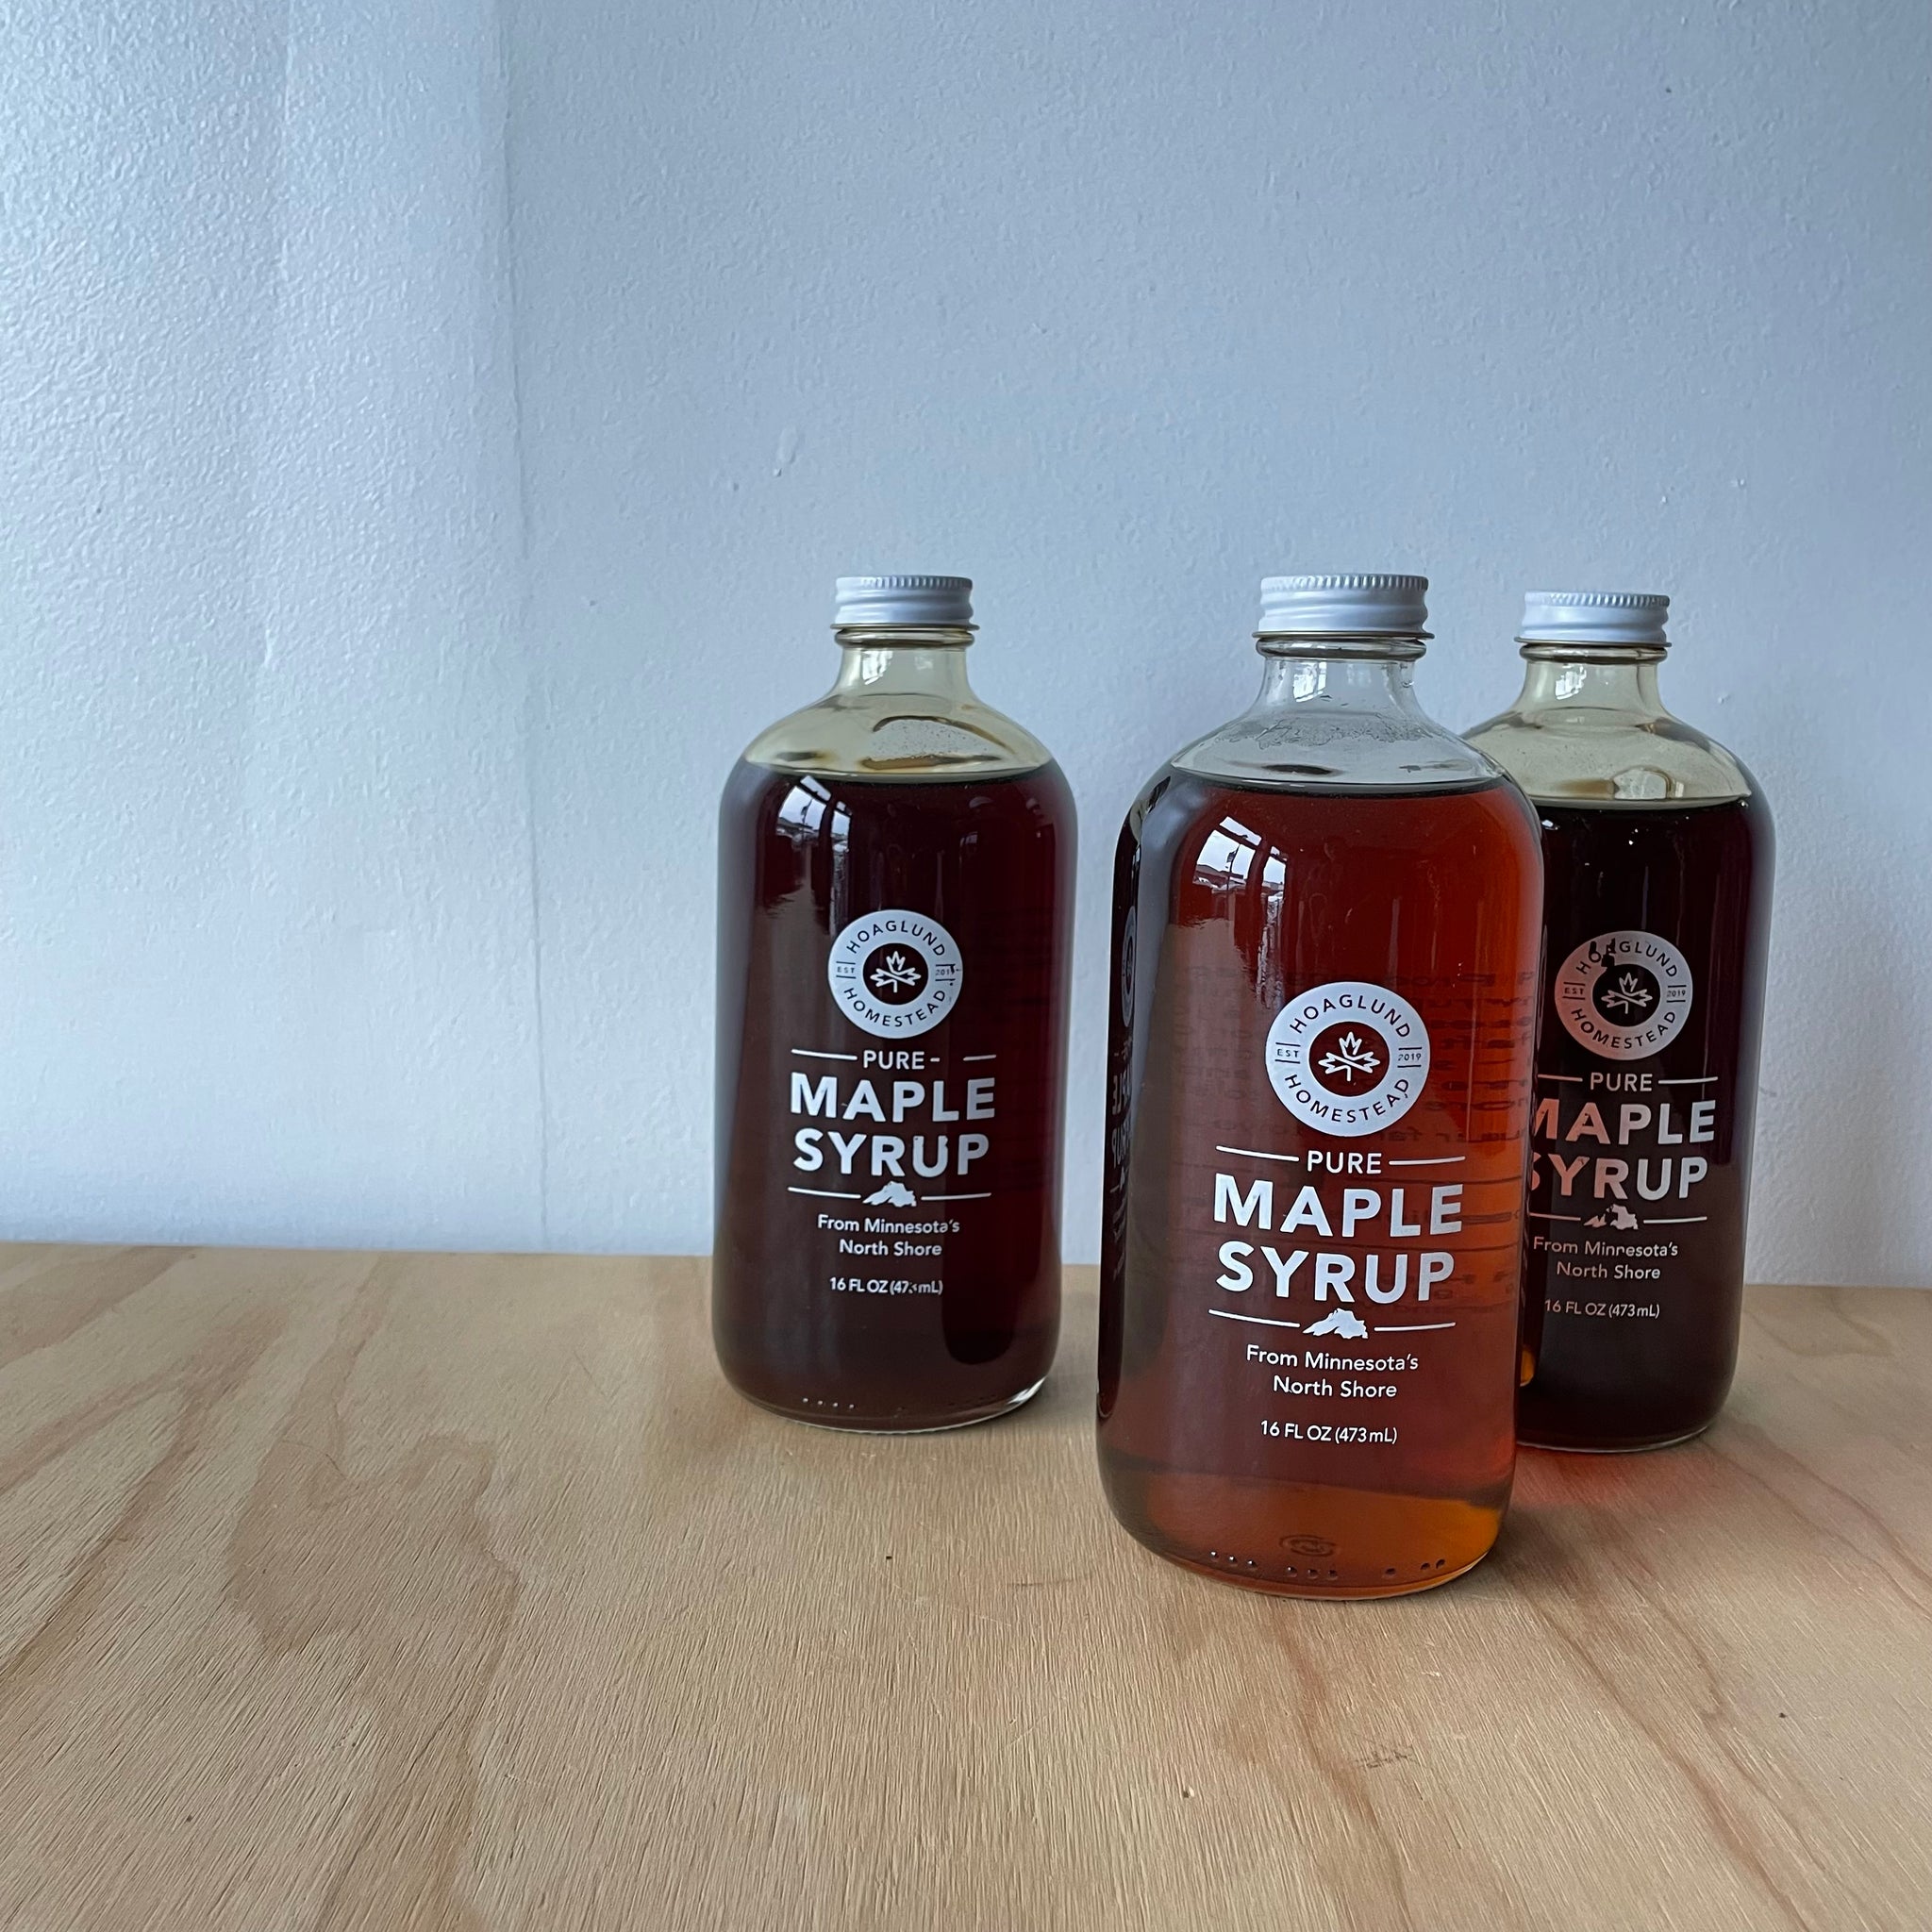 Local Maple Syrup from Hoaglund Homestead